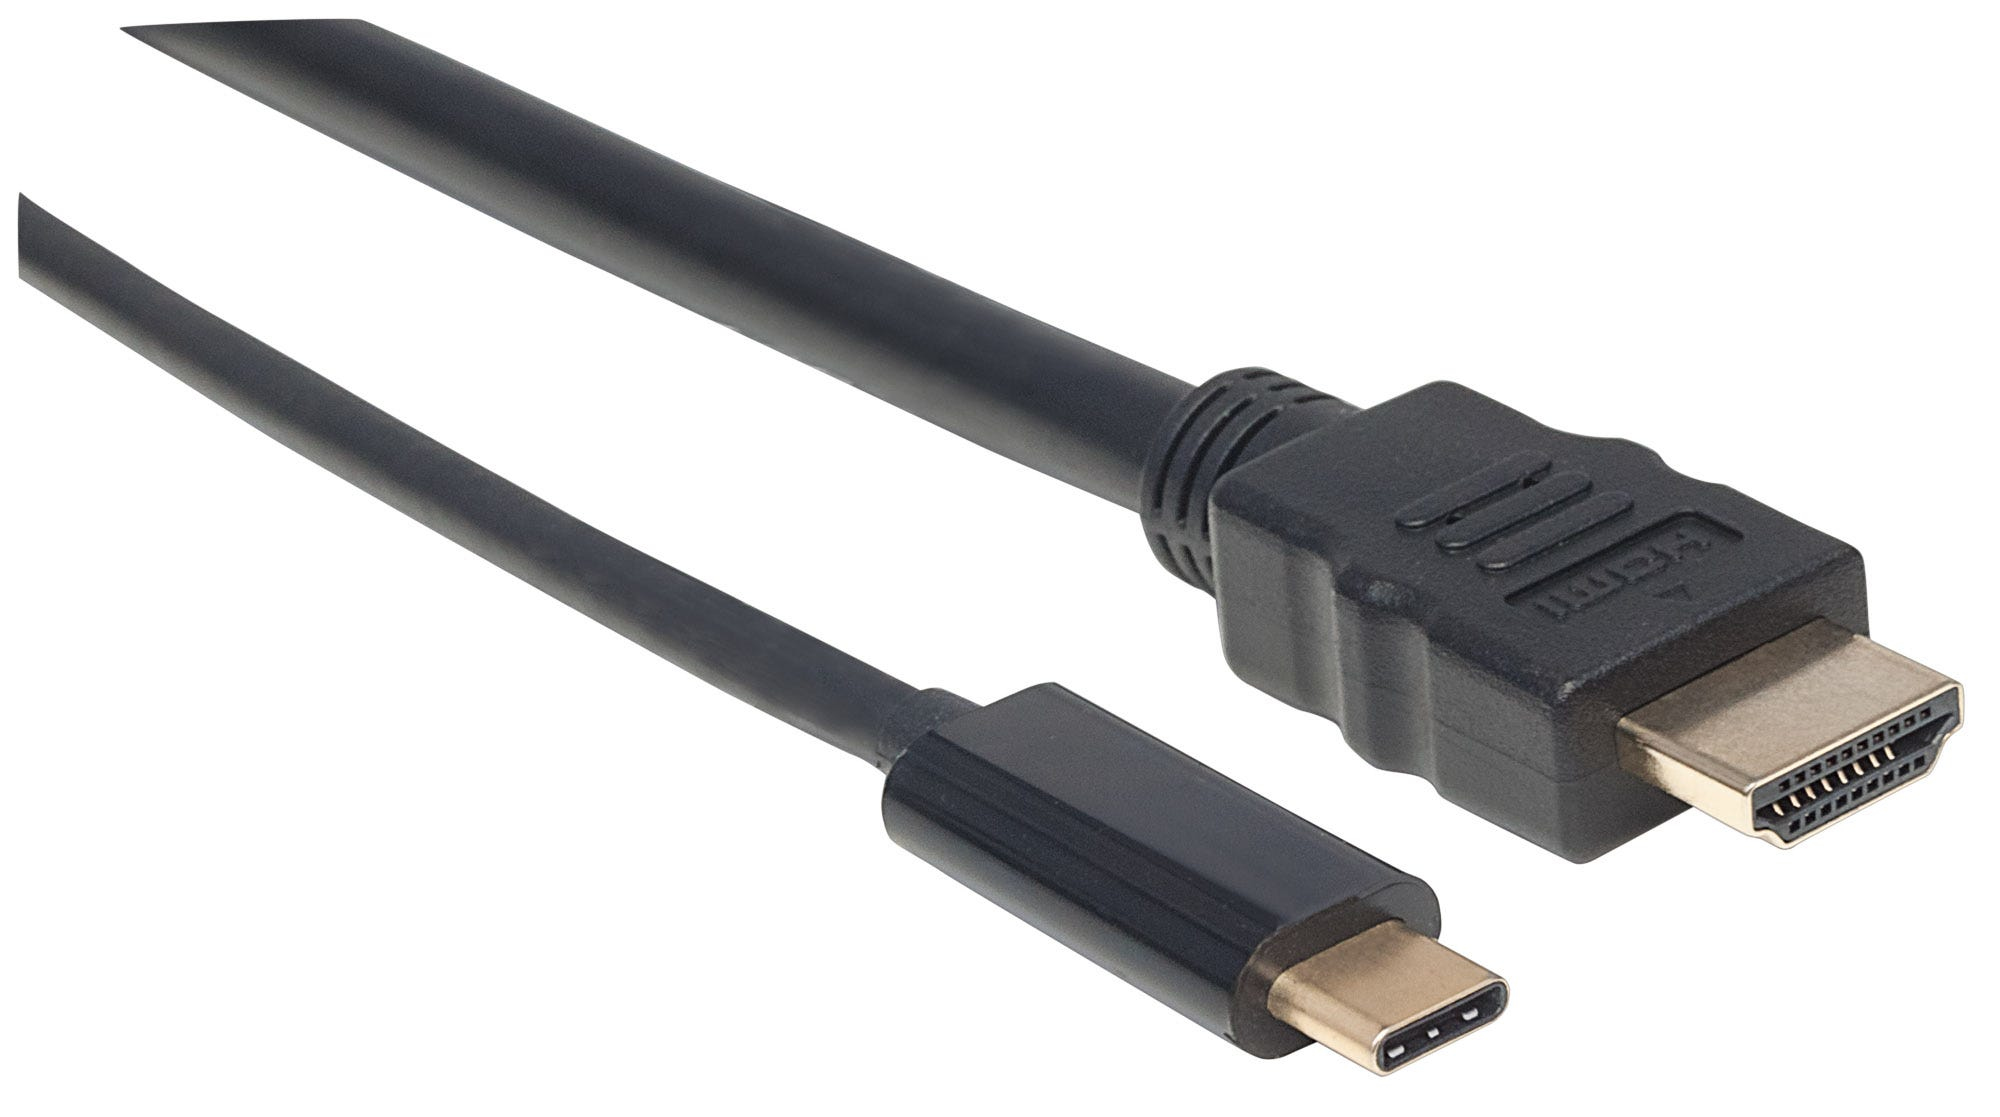 Manhattan USB-C to HDMI Cable, 4K, 1m, Male to Male, 3840x2160@60Hz; 4K Ultra HD Video Aspect Ratio 21:9, Black, Polybag